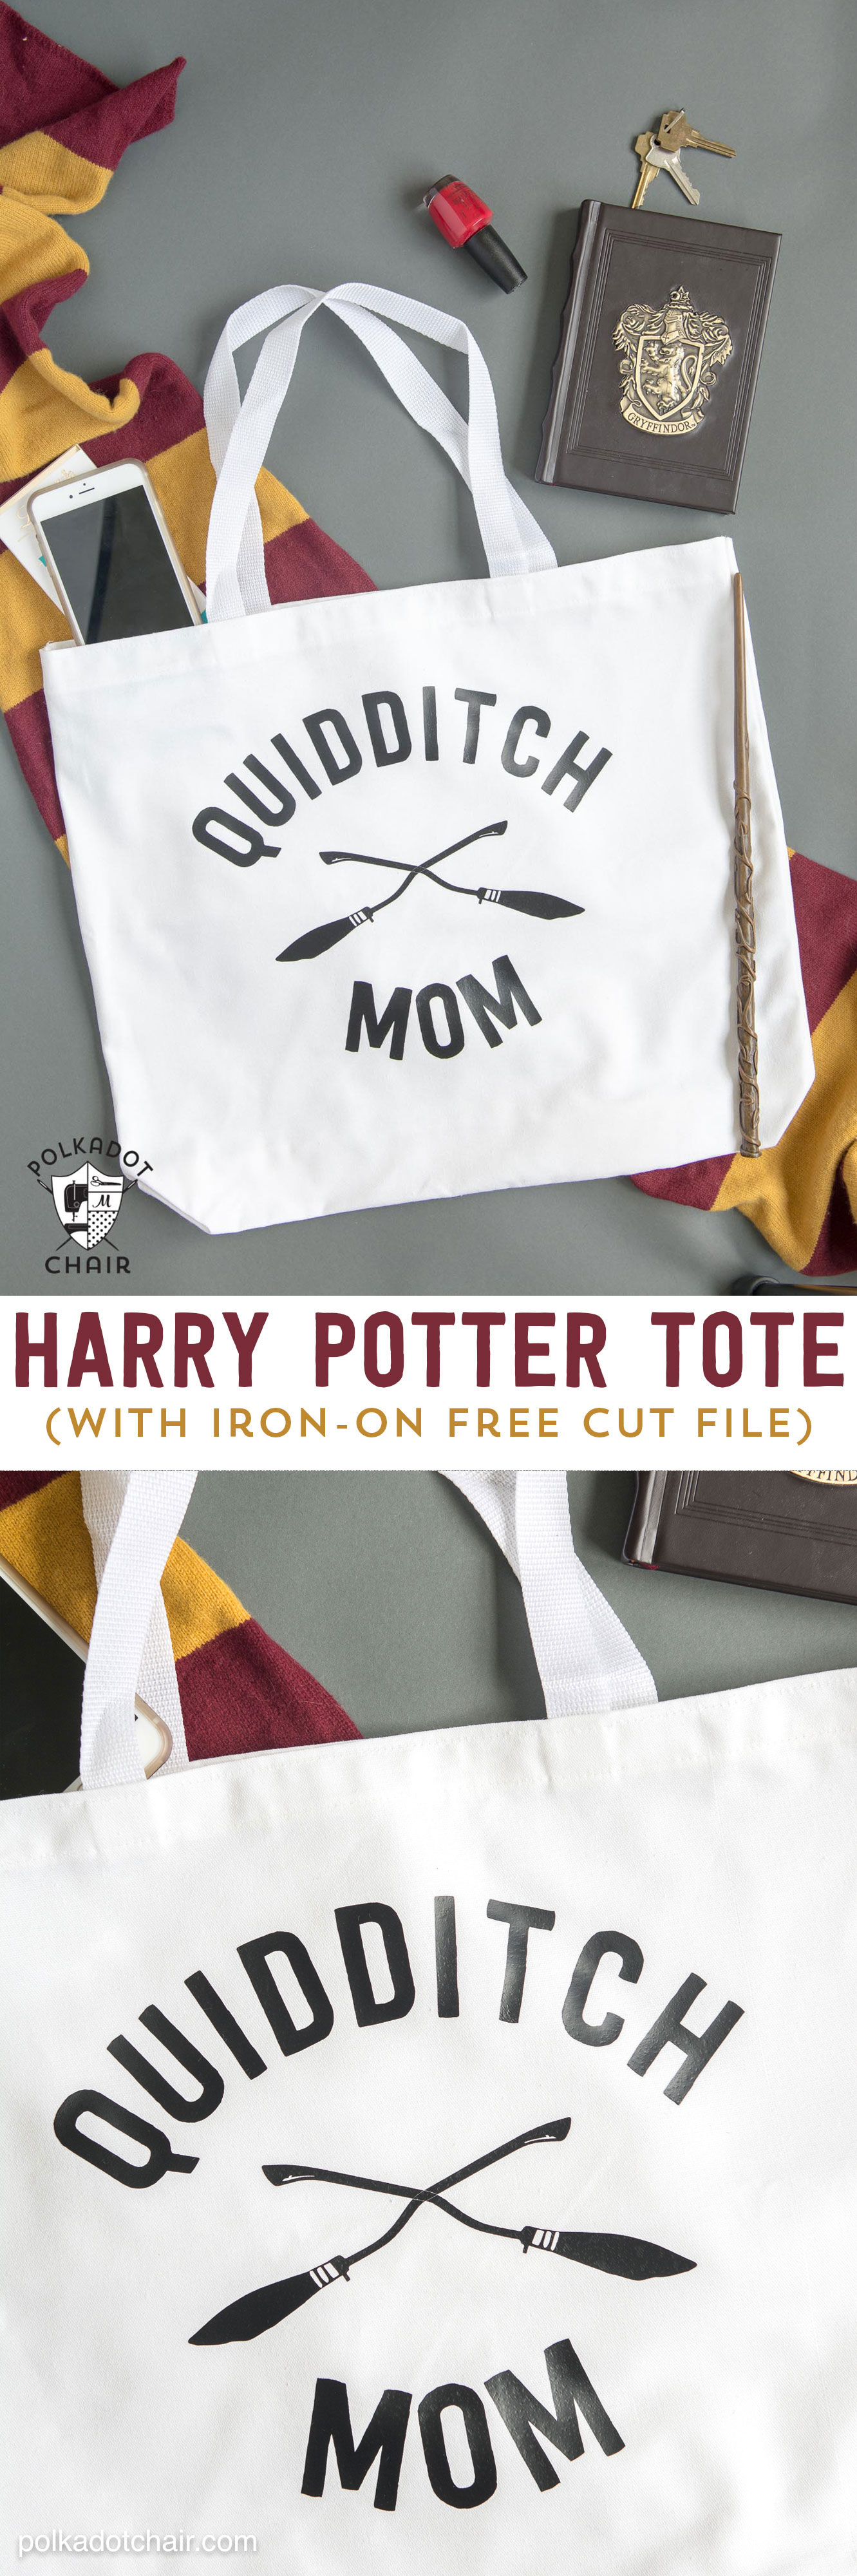 DIY "Quidditch Mom" tote bag project. She has a free download for the iron-on on her site!